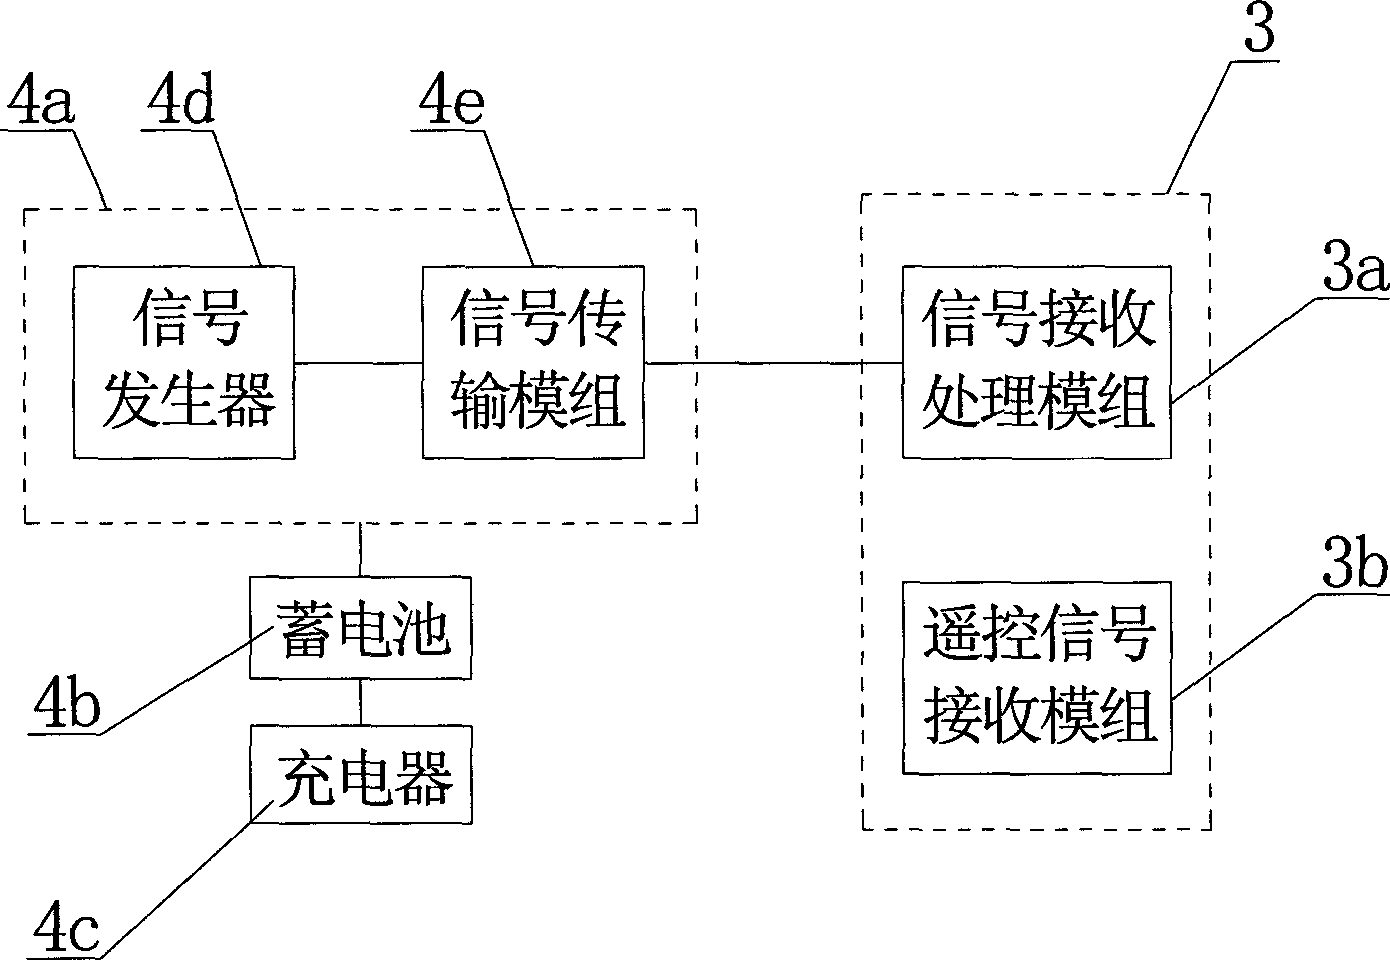 High-rise water spray dust-setting device for controlling PM2.5 air quality from exceeding standard